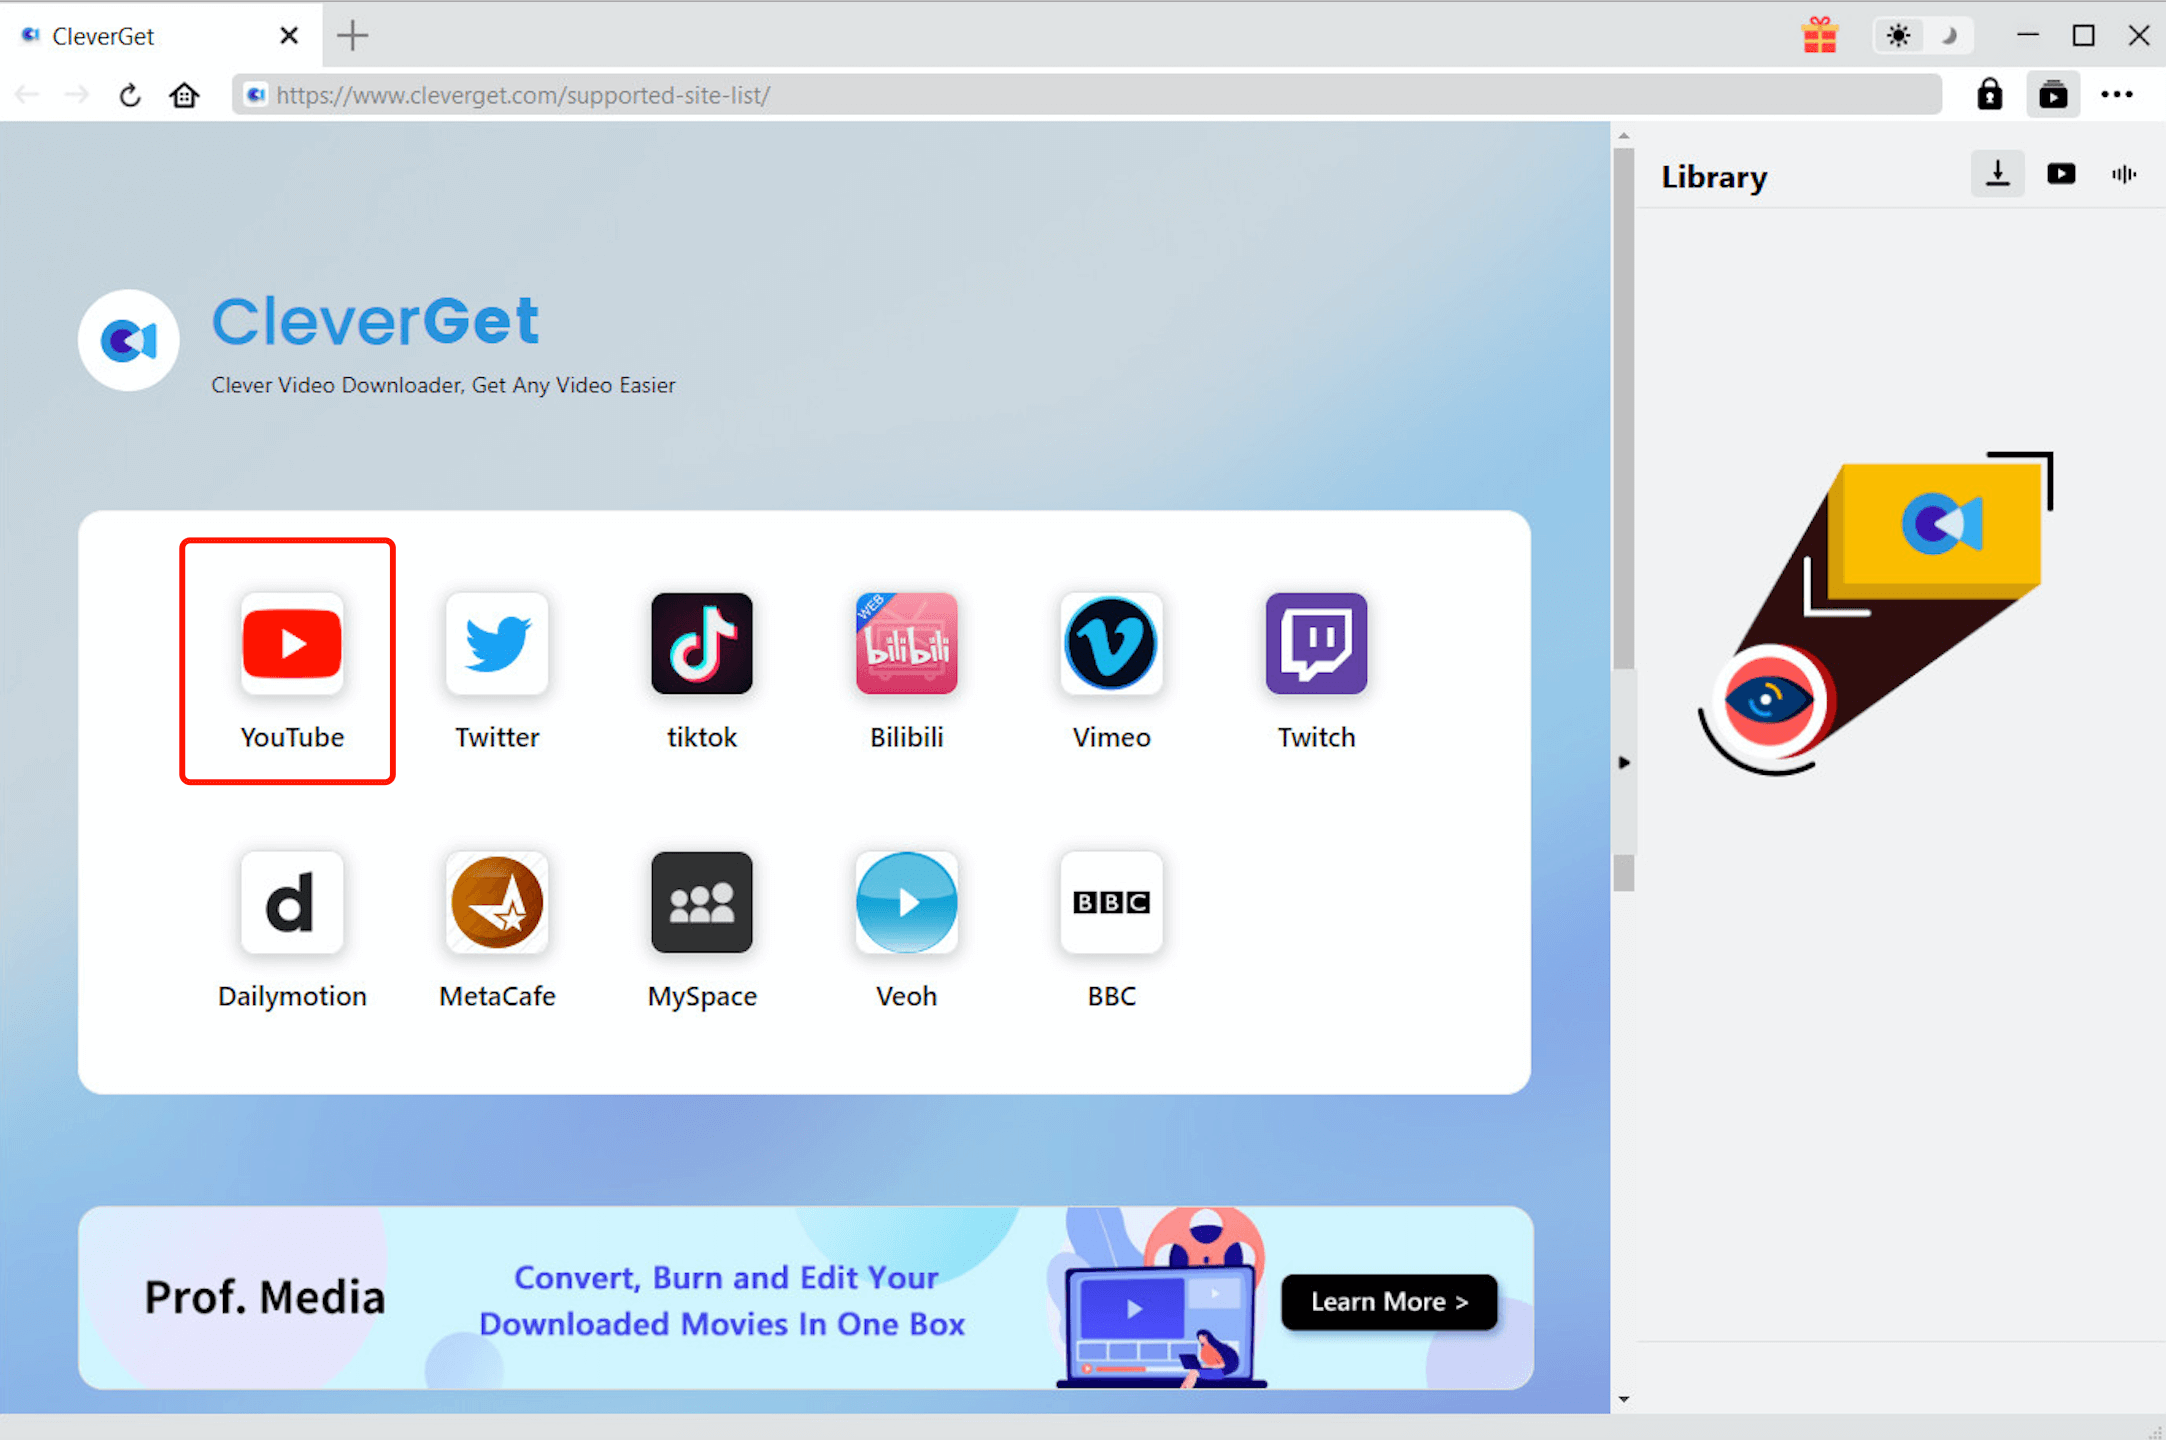  download-YouTube-live-stream-with-CleverGet-locate-YouTube-video 